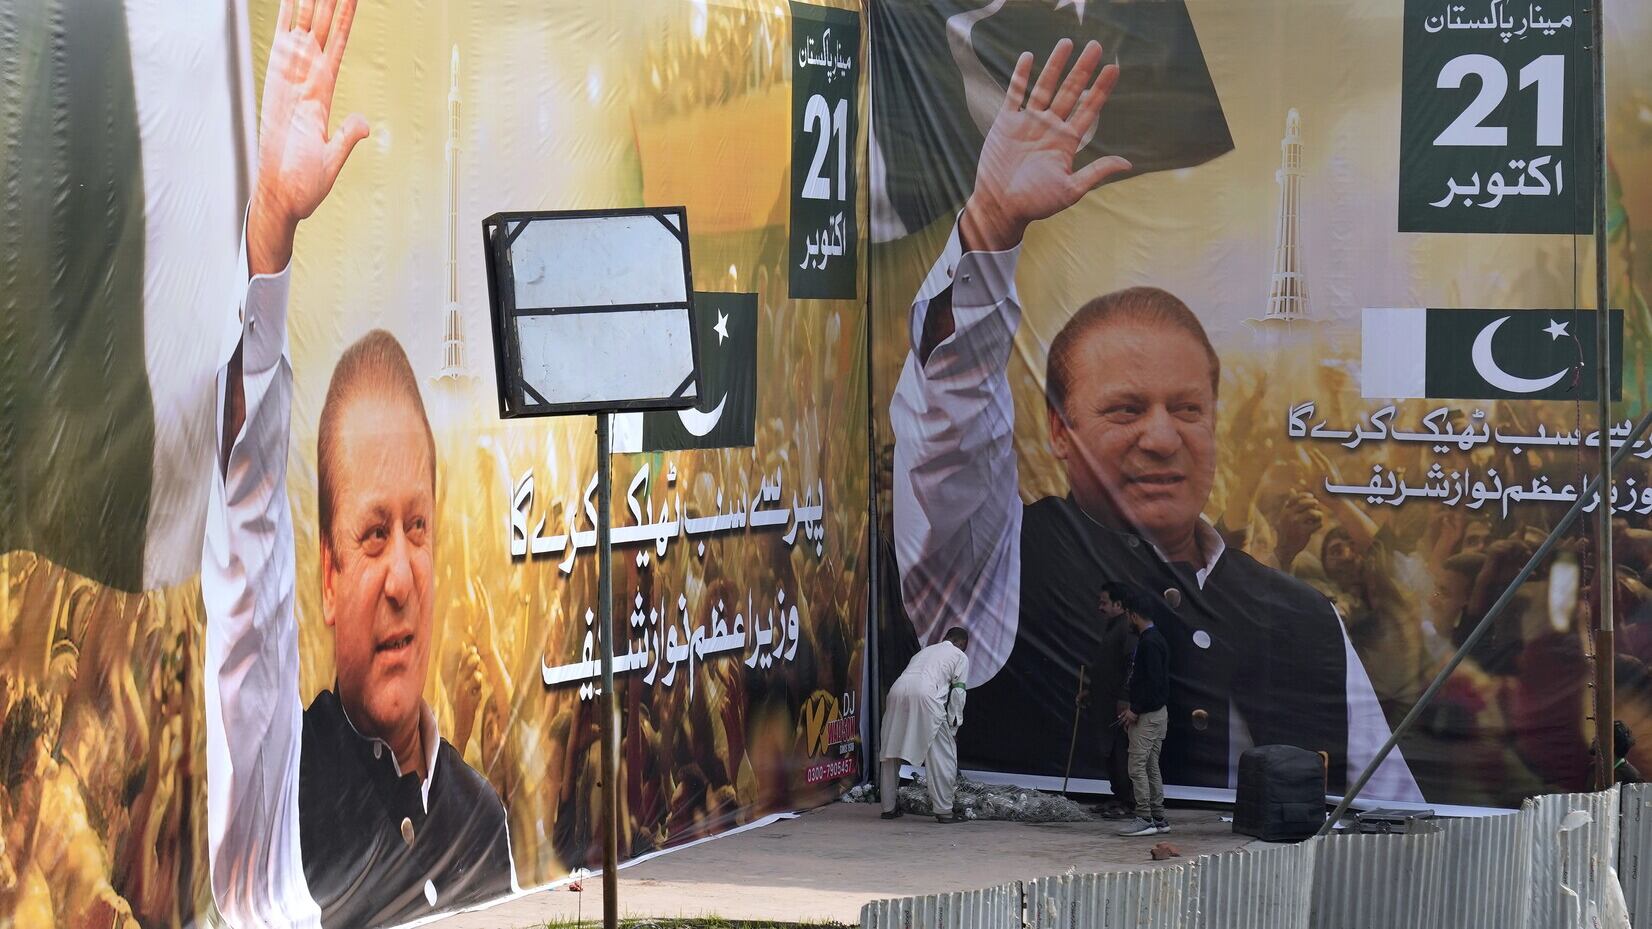 Huge portraits of Nawaz Sharif at the venue of his welcoming rally in Lahore (KM Chaudary/AP)